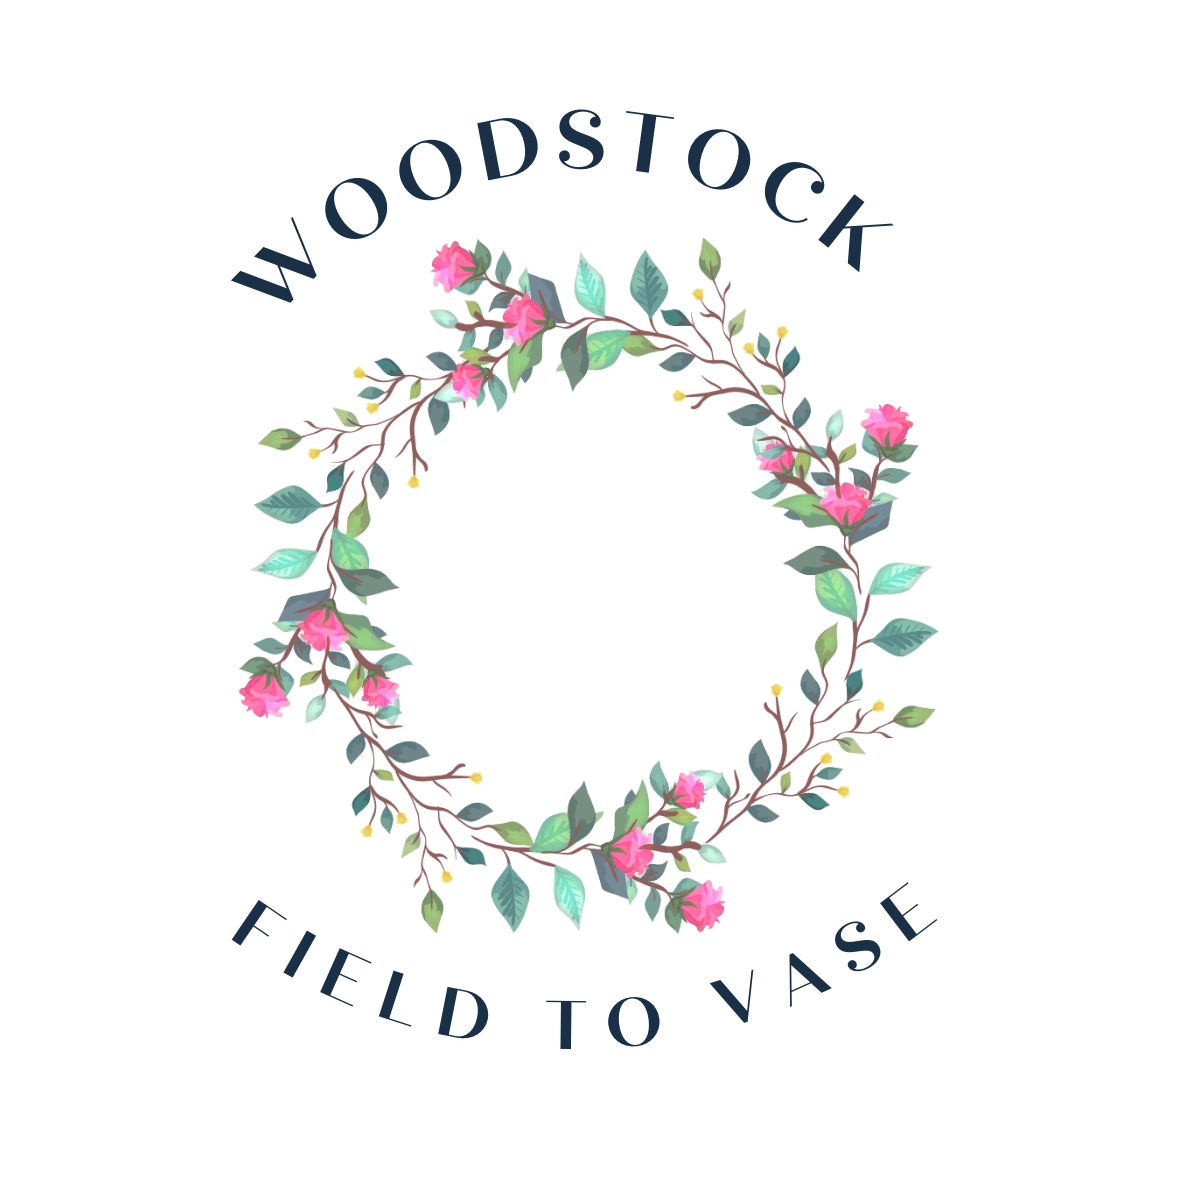 Woodstock Field to Vase- LOCAL FLOWER FARM and FLORIST in  woodstock NY